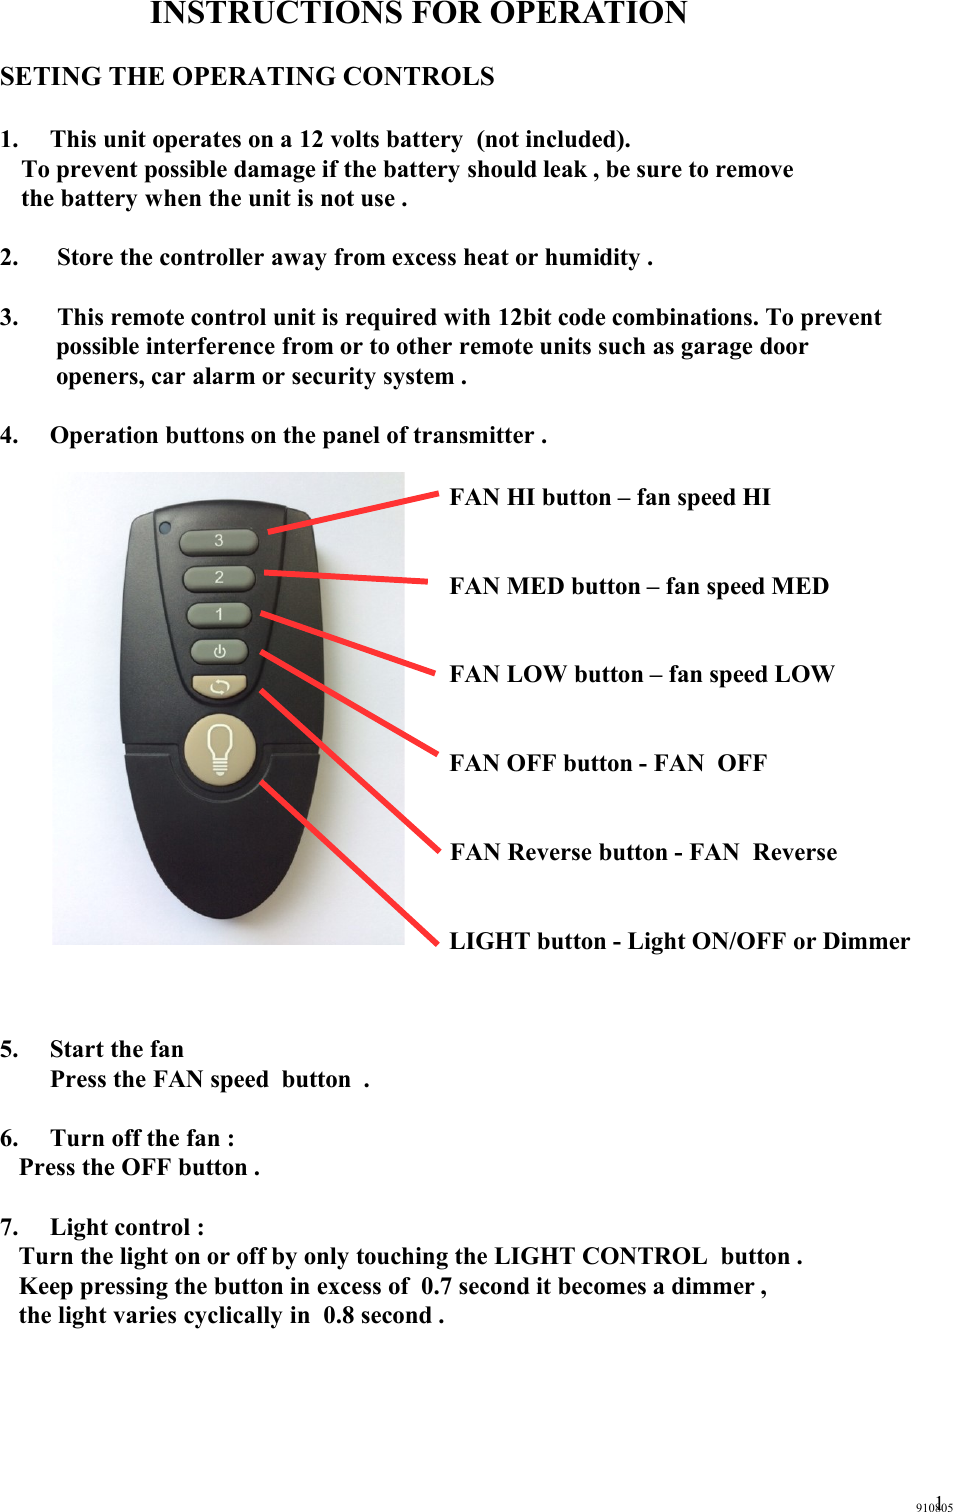 INSTRUCTIONS FOR OPERATIONSETING THE OPERATING CONTROLS1. This unit operates on a 12 volts battery  (not included).   To prevent possible damage if the battery should leak , be sure to remove   the battery when the unit is not use .2.  Store the controller away from excess heat or humidity .3.  This remote control unit is required with 12bit code combinations. To prevent possible interference from or to other remote units such as garage door openers, car alarm or security system .  4. Operation buttons on the panel of transmitter .  FAN HI button – fan speed HIFAN MED button – fan speed MEDFAN LOW button – fan speed LOWFAN OFF button - FAN  OFFFAN Reverse button - FAN  ReverseLIGHT button - Light ON/OFF or Dimmer5. Start the fan Press the FAN speed  button  .6. Turn off the fan :Press the OFF button .7. Light control :Turn the light on or off by only touching the LIGHT CONTROL  button .Keep pressing the button in excess of  0.7 second it becomes a dimmer ,the light varies cyclically in  0.8 second .9108051